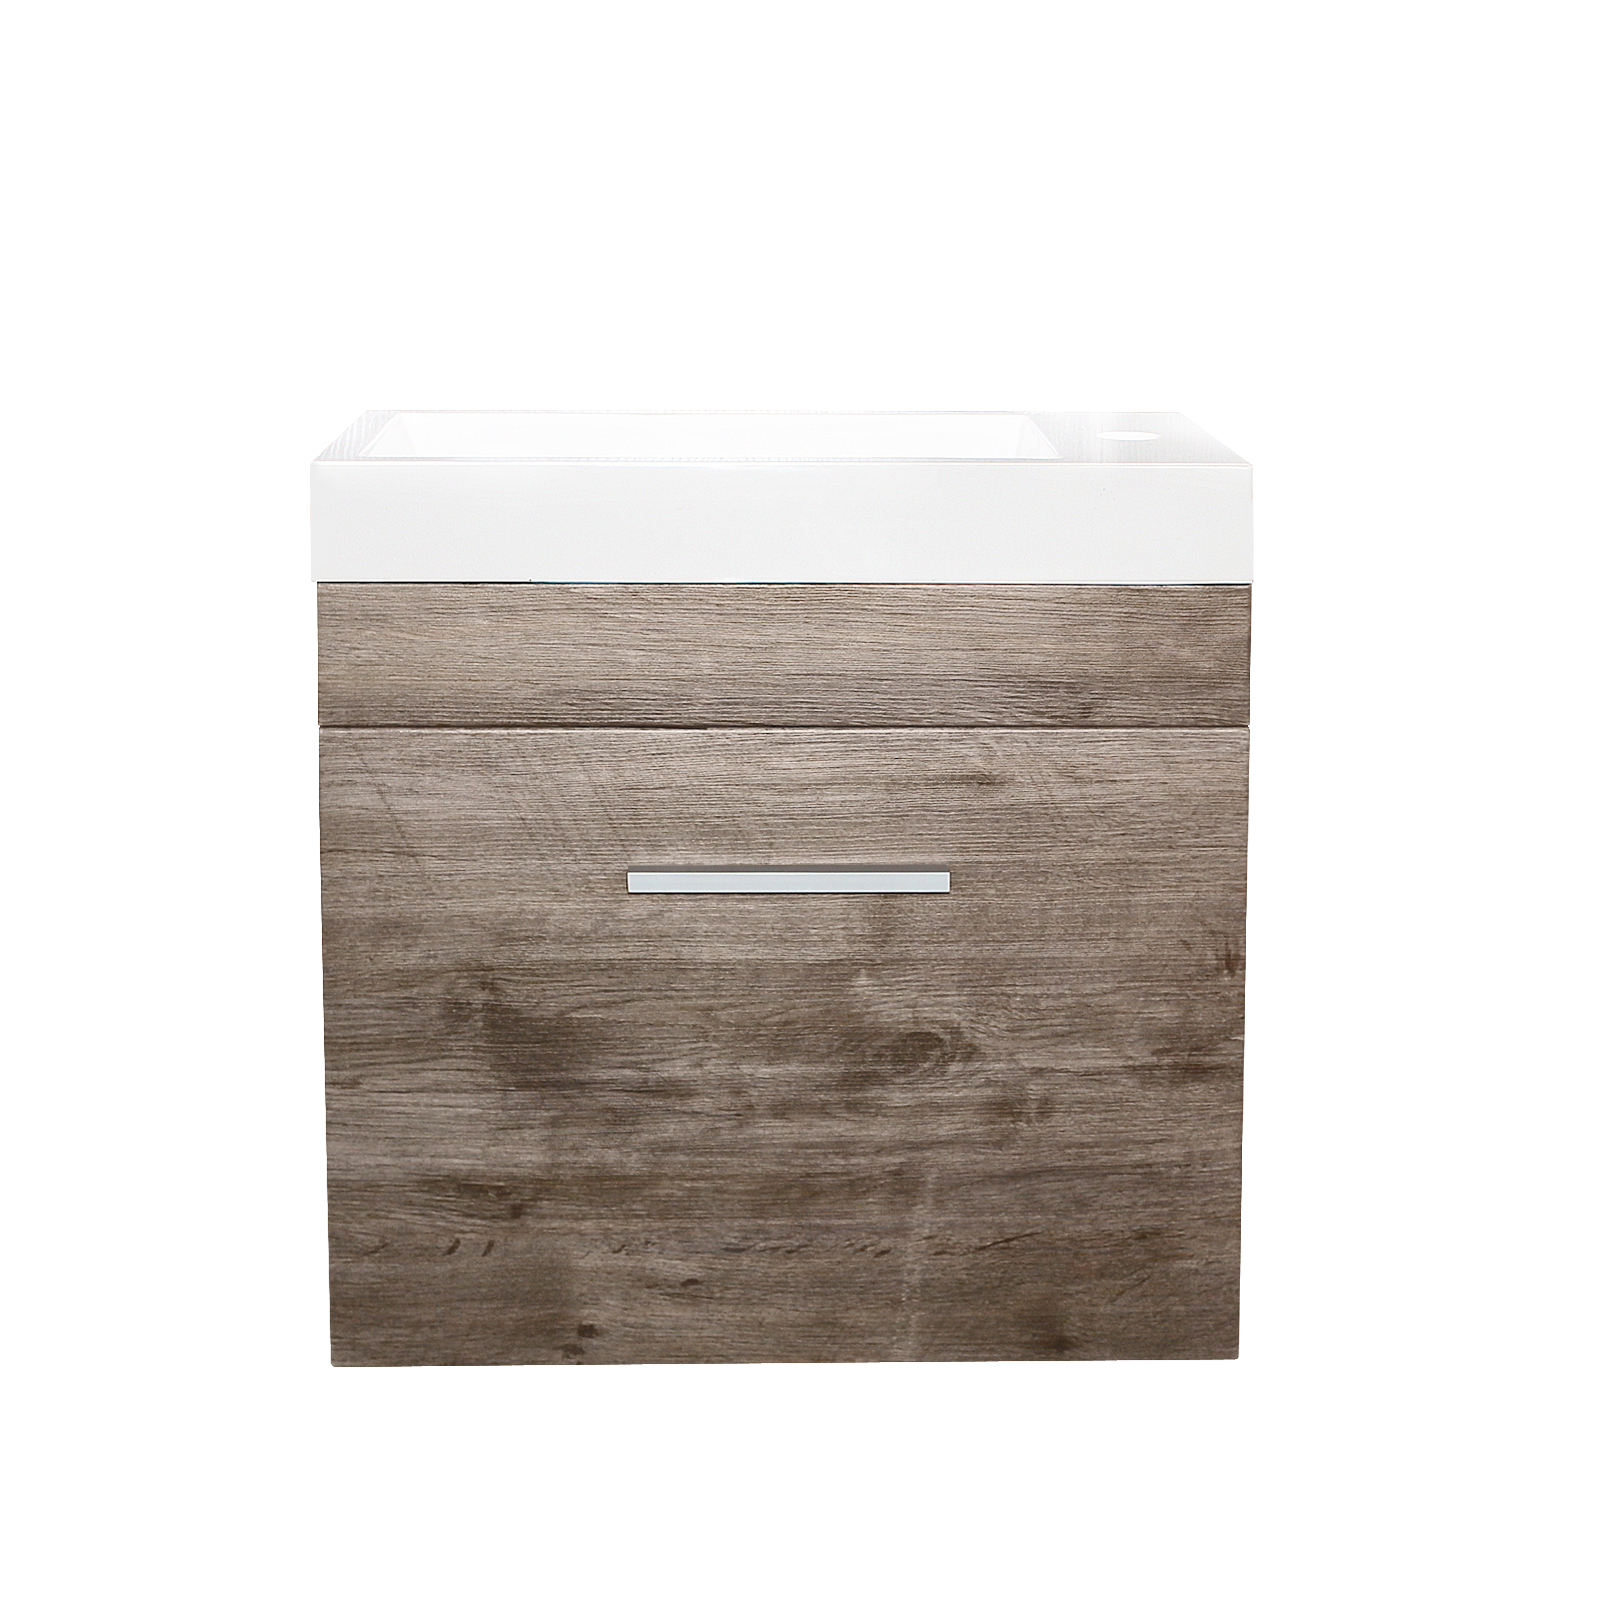 500x250x520mm Wall Hung Bathroom Vanity with Poly Top White Oak Wood Grain One Tap Hole